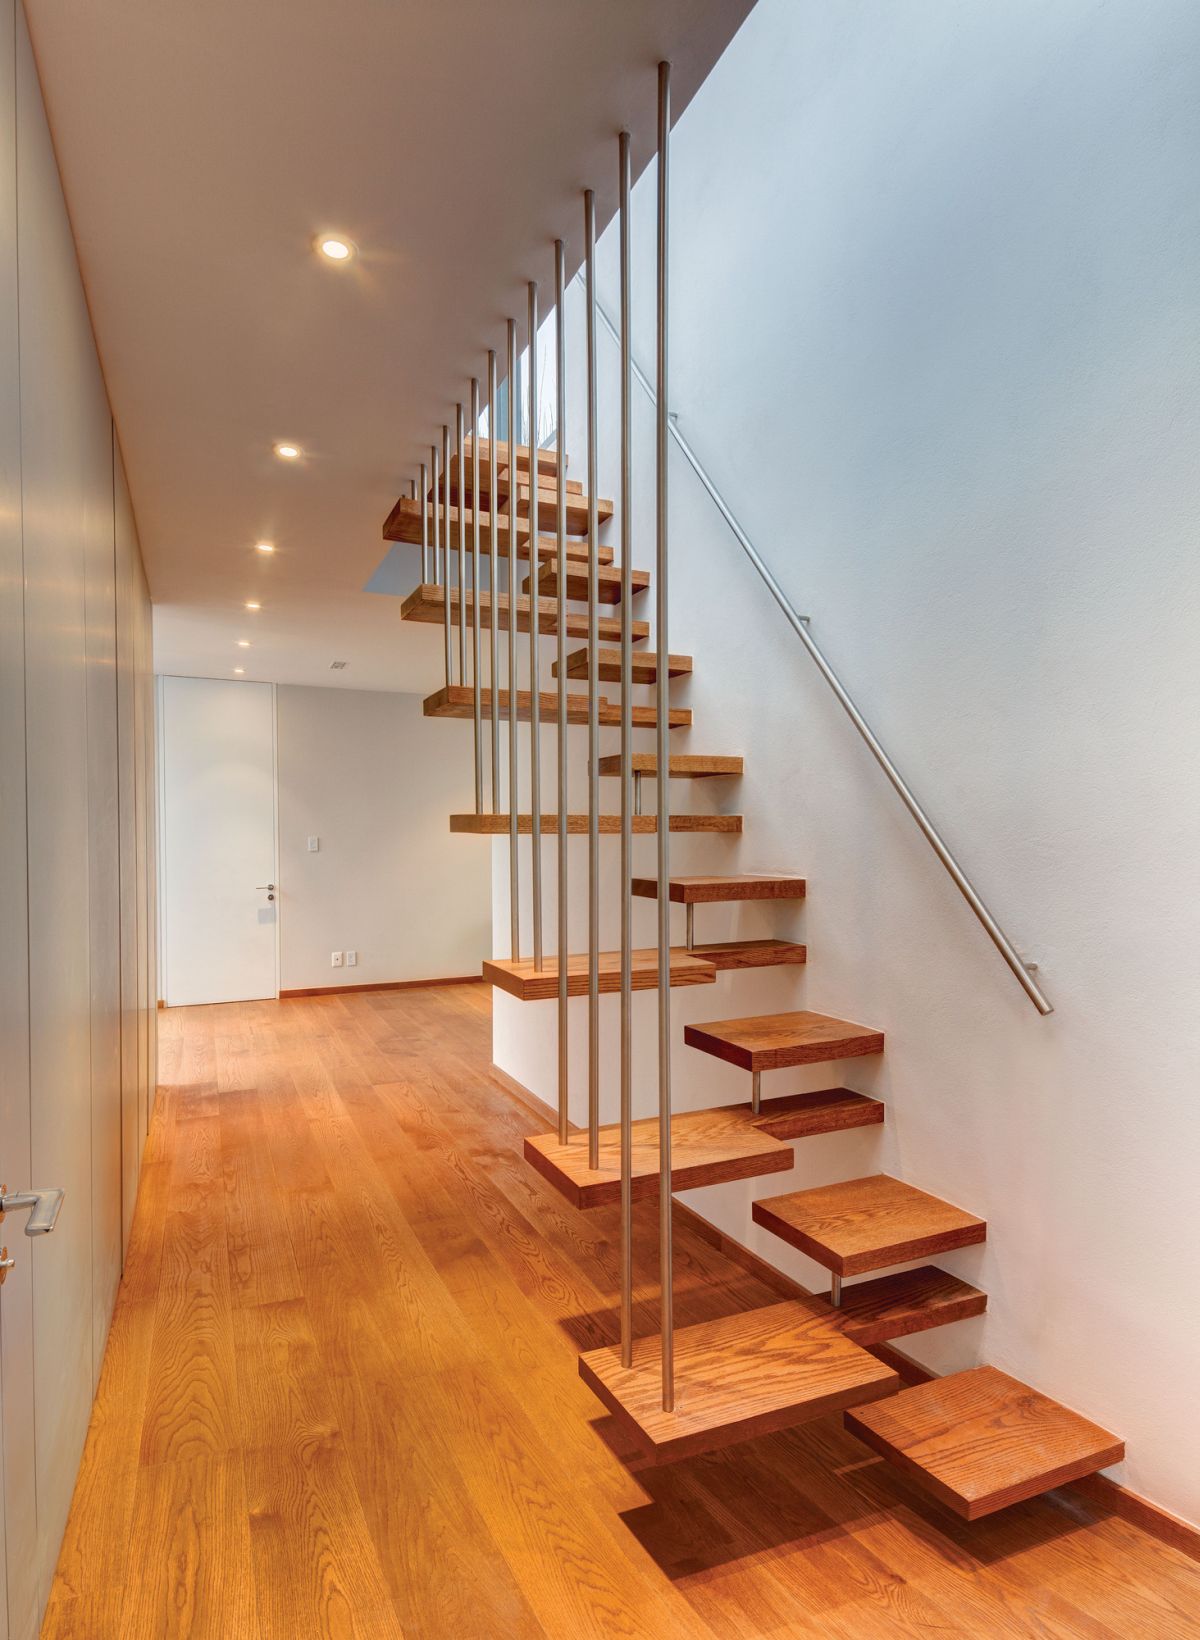 Alternating Tread Stairs Change The Perspective With New Designs